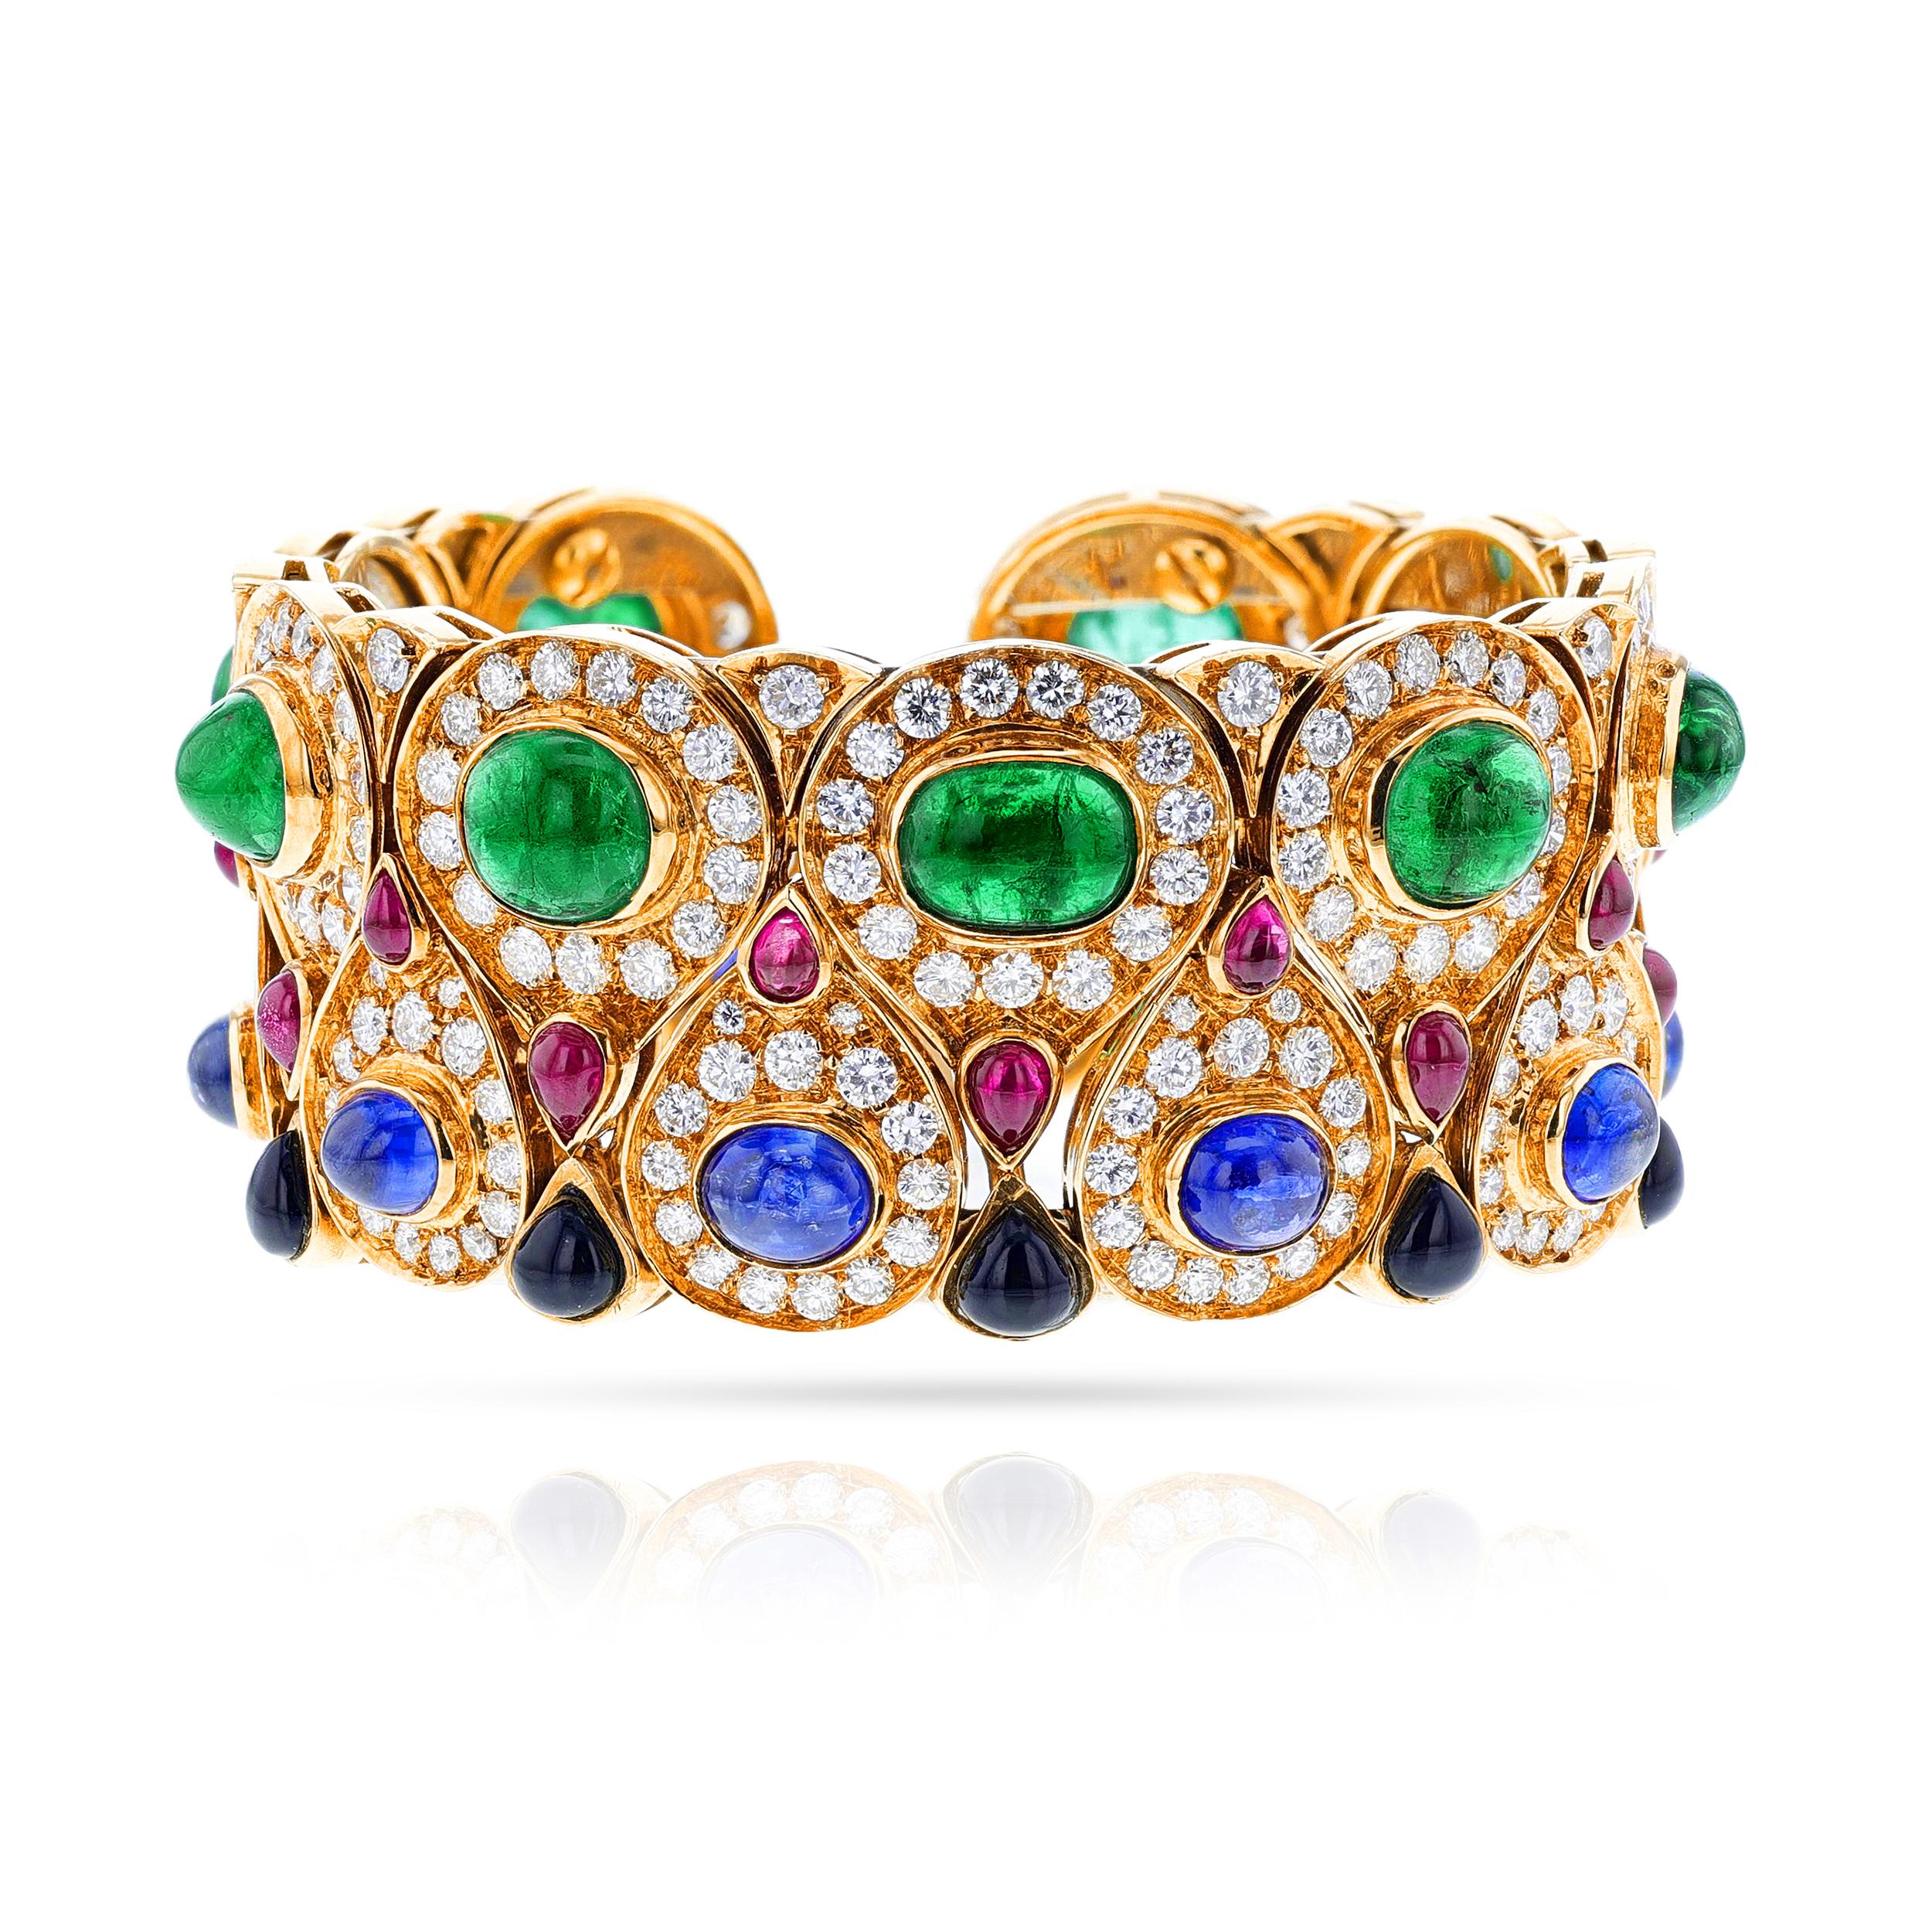 A Multi-Gemstone Bangle with Emeralds, Diamonds, Rubies, Sapphires and Onyx, 18k. There are oval emerald cabochons, oval saphire cabochons, round diamonds, with pear ruby cabochons, and pear shaped onyx. The emeralds weigh appx. 17 cts, the